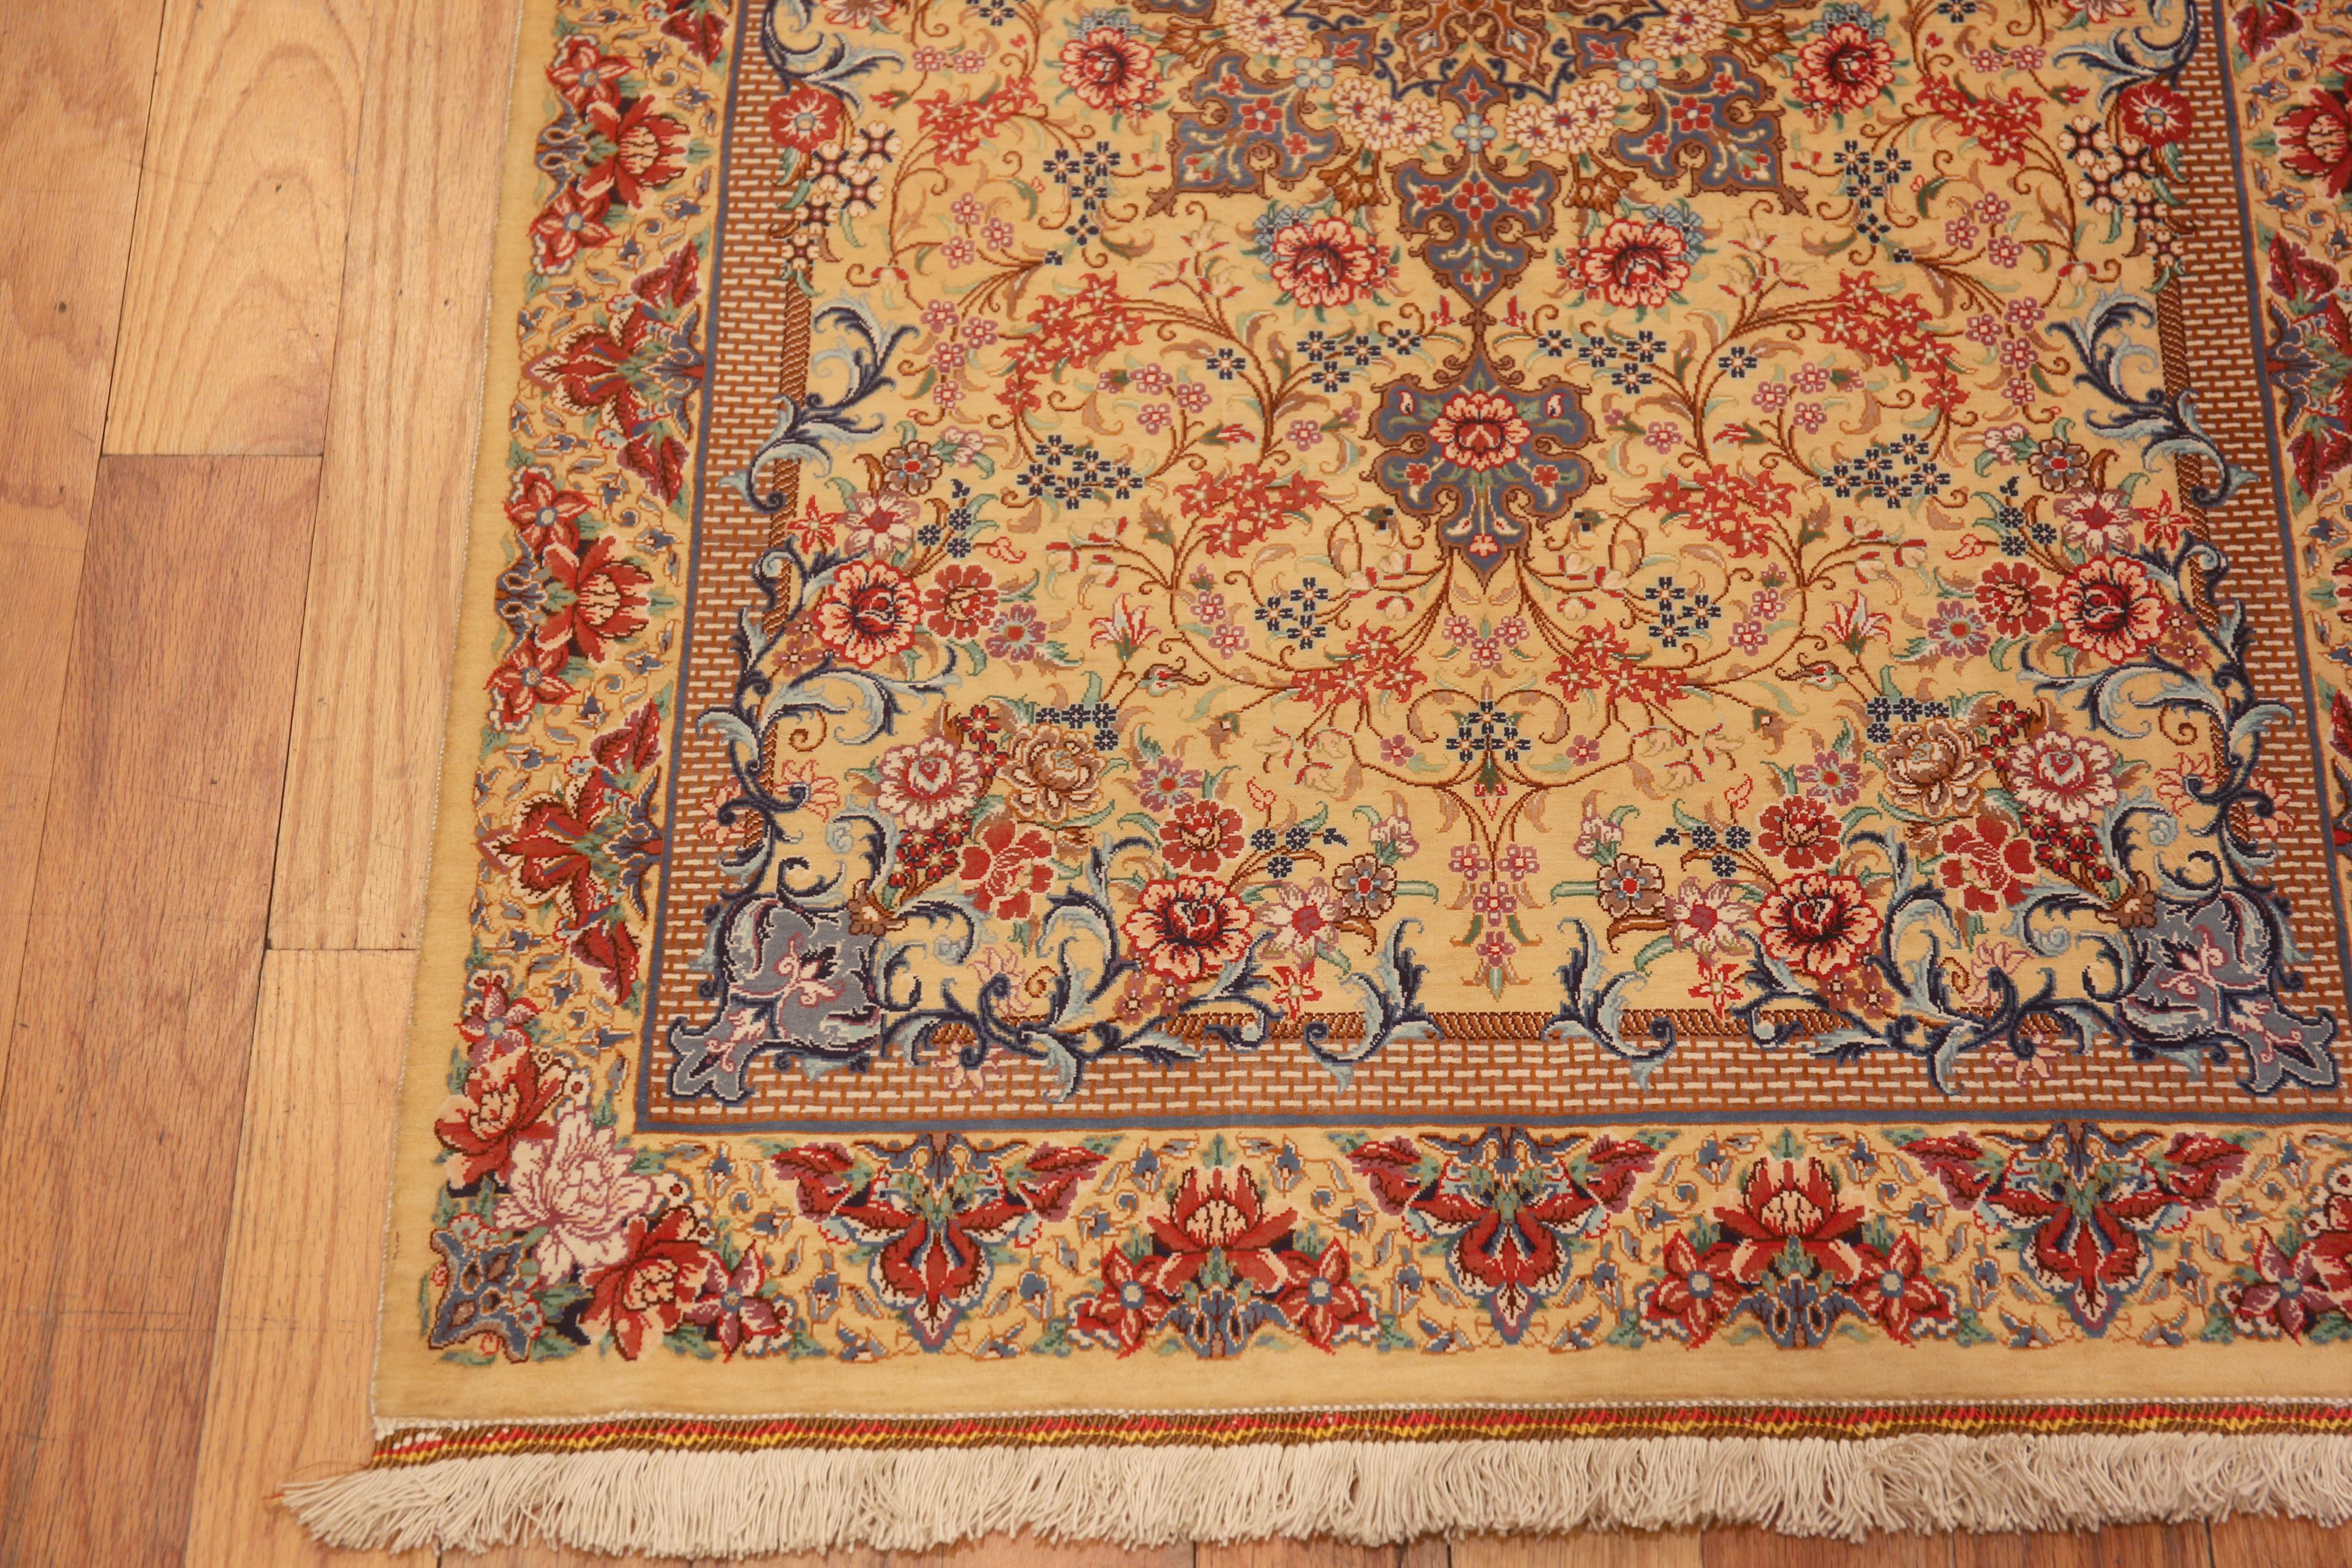 Beautiful Fine Artistic Small Floral Vintage Luxurious Persian Silk Qum Rug, country of origin: Persian Rugs, Circa date: Vintage